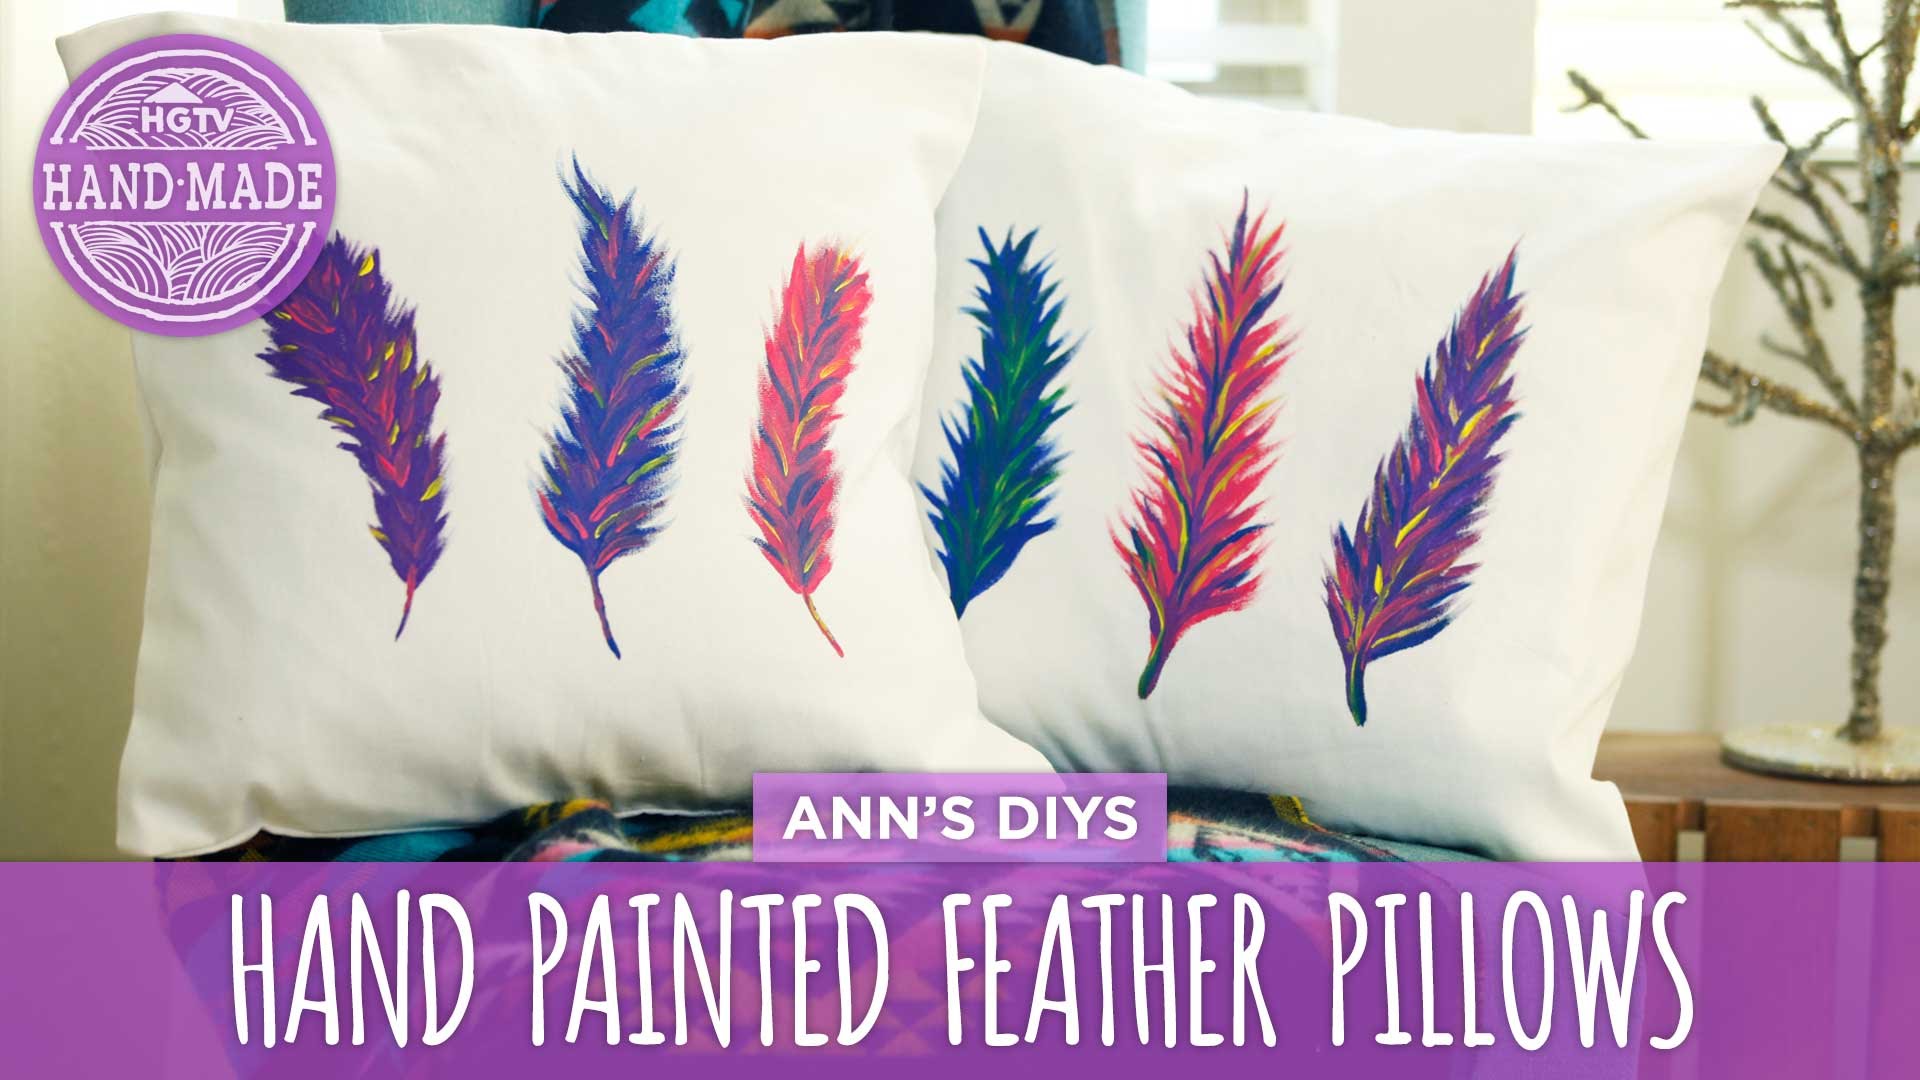 Hand painted feather pillows